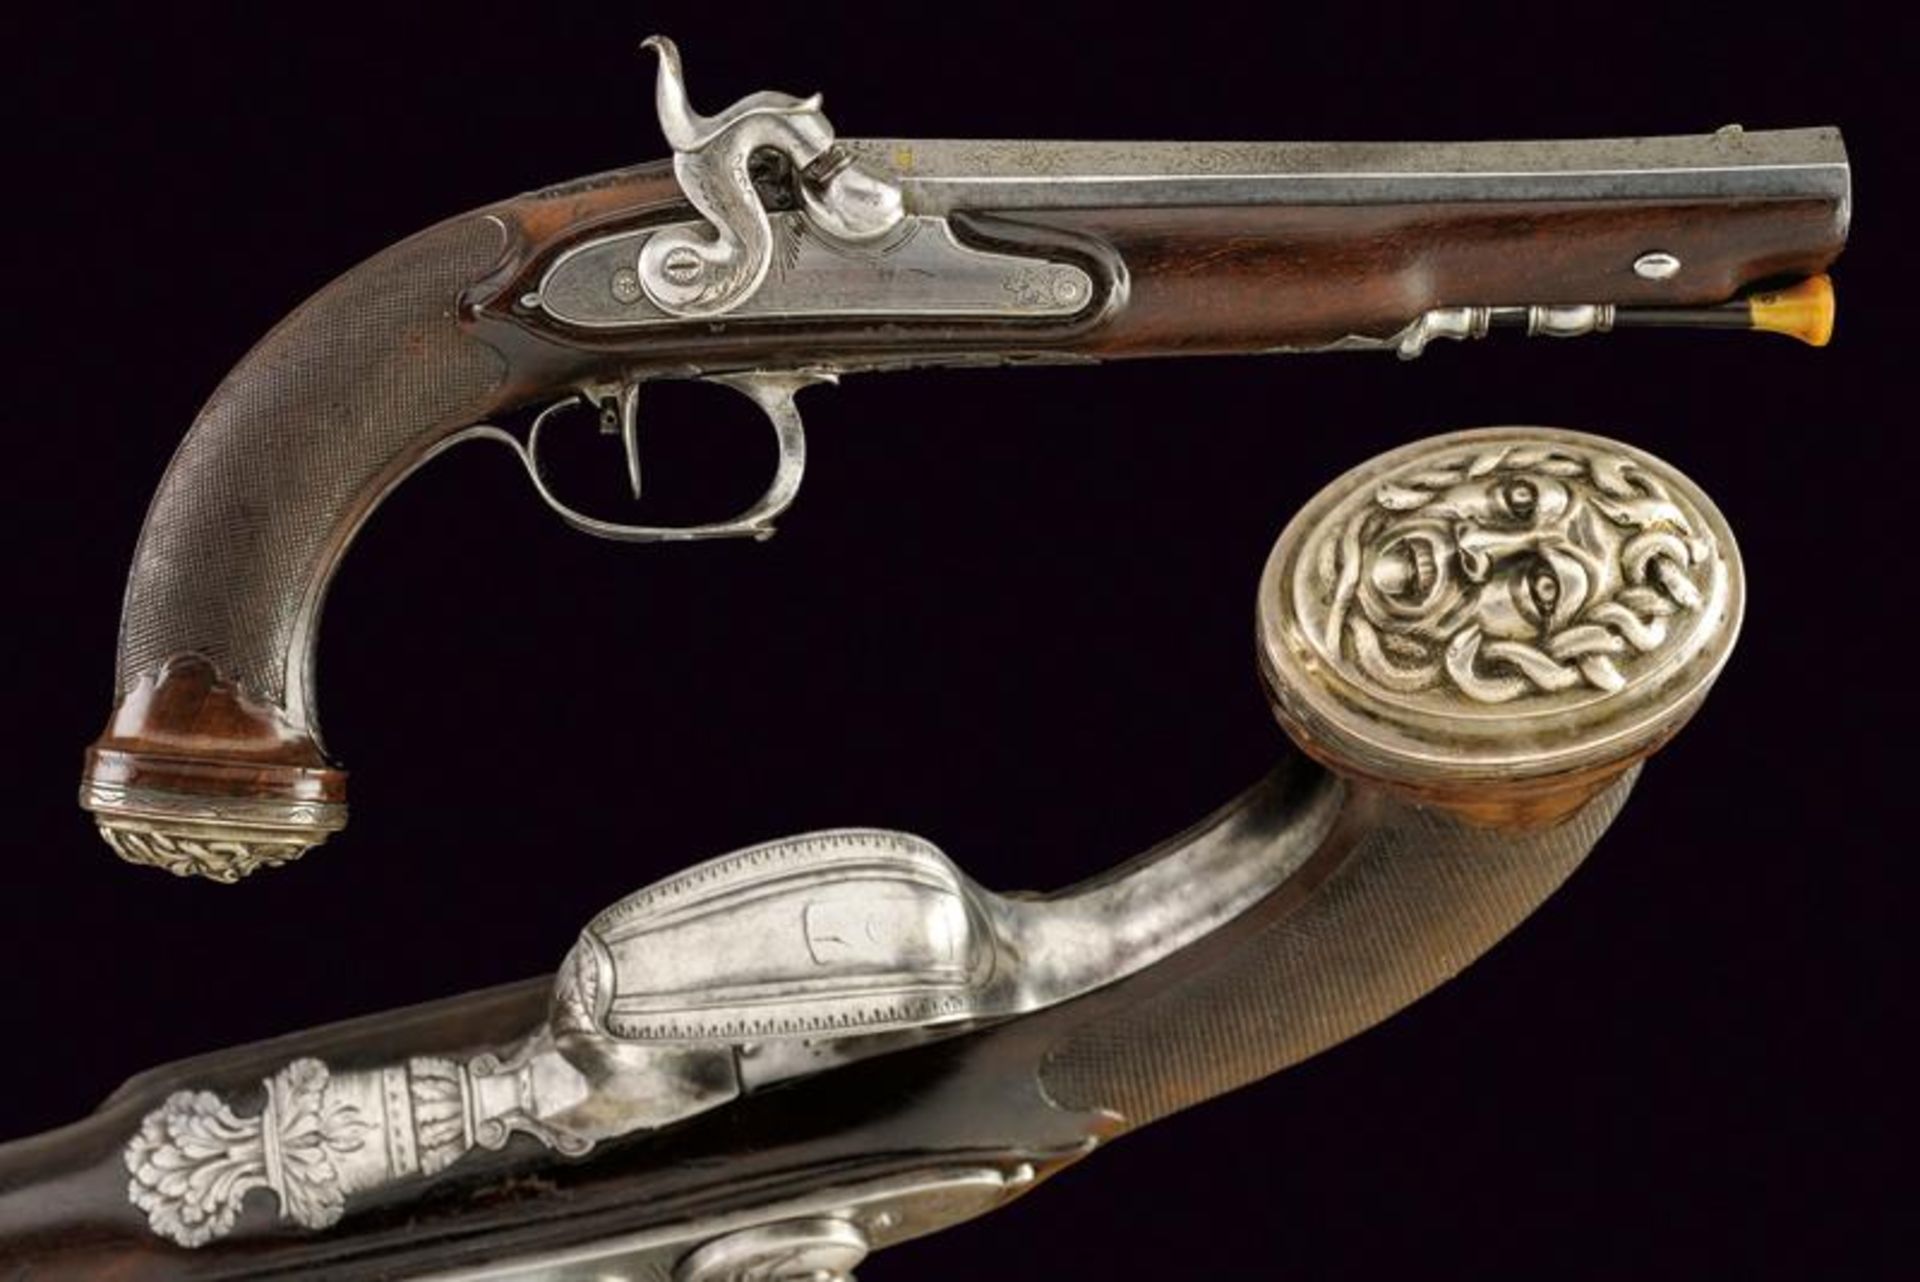 A fine officer's percussion pistol